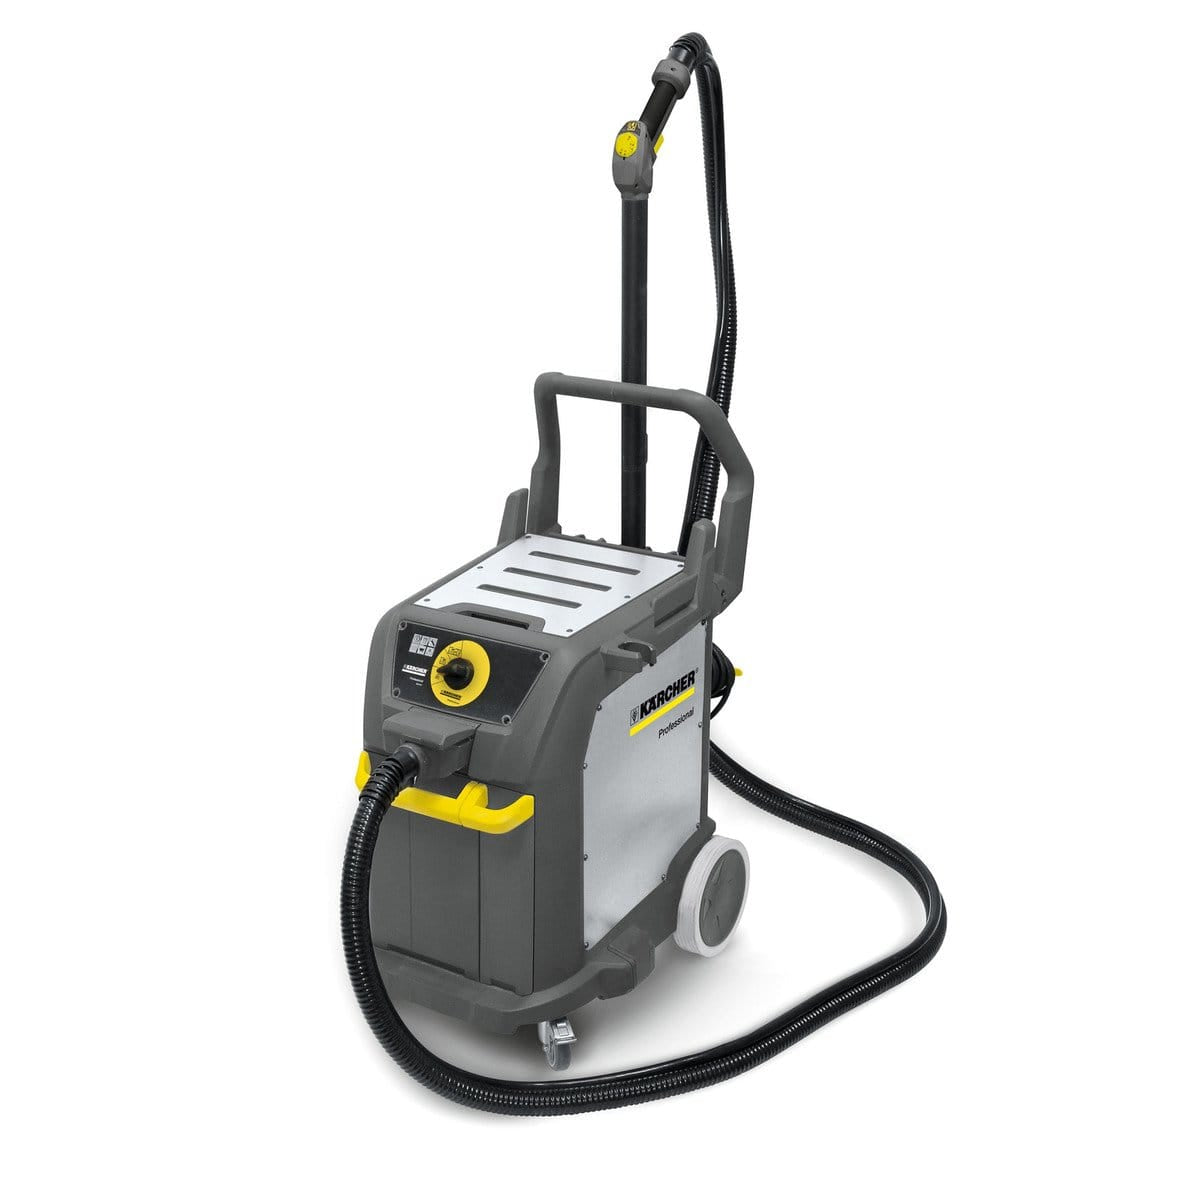 Karcher Steam Cleaner - SG 4/4 | Supply Master | Accra, Ghana Tools Building Steel Engineering Hardware tool